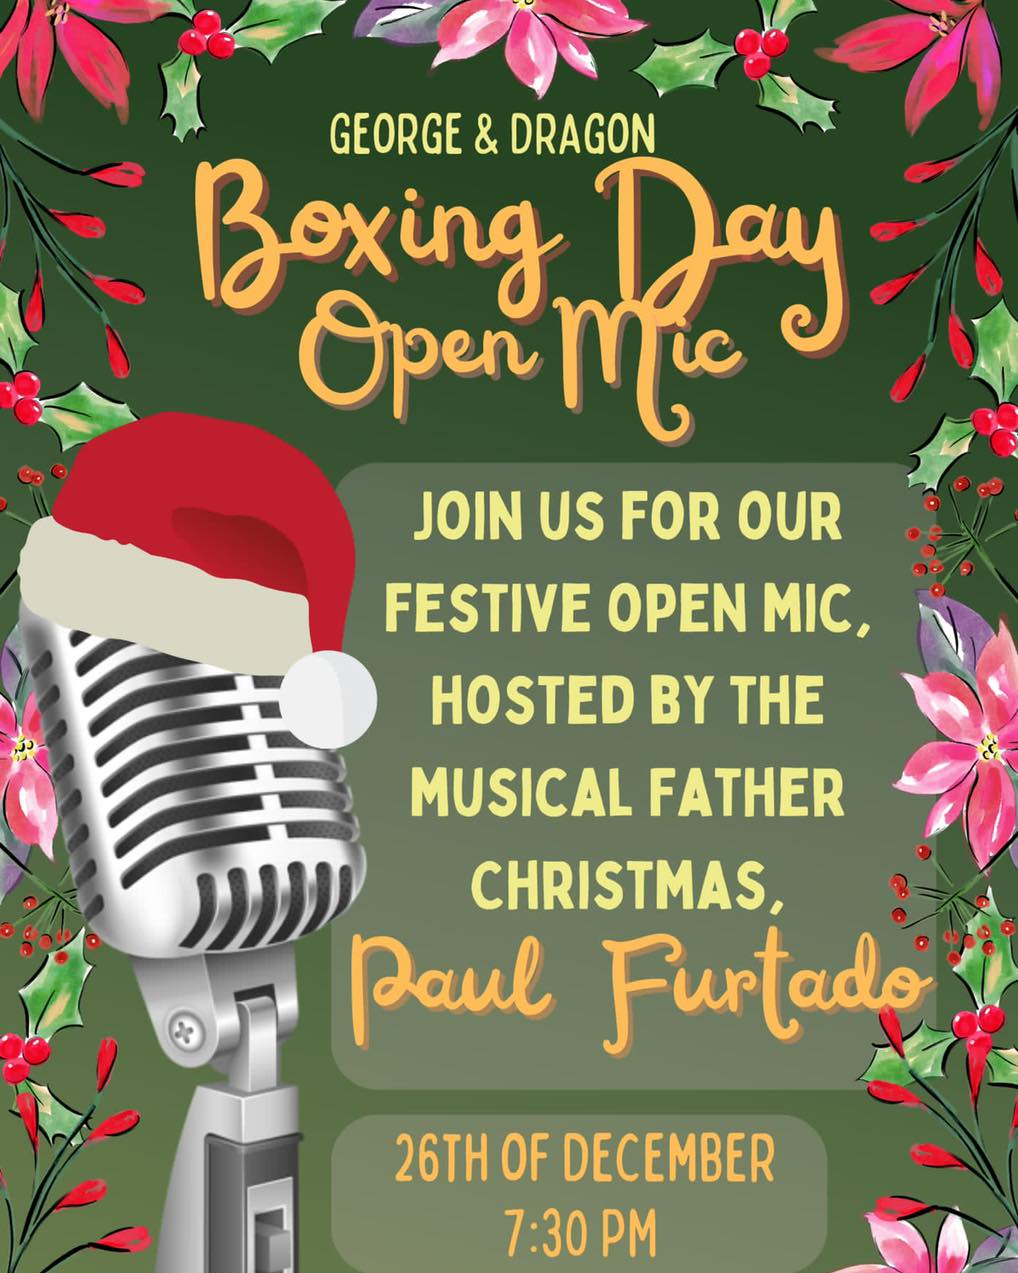 BOXING DAY OPEN MIC